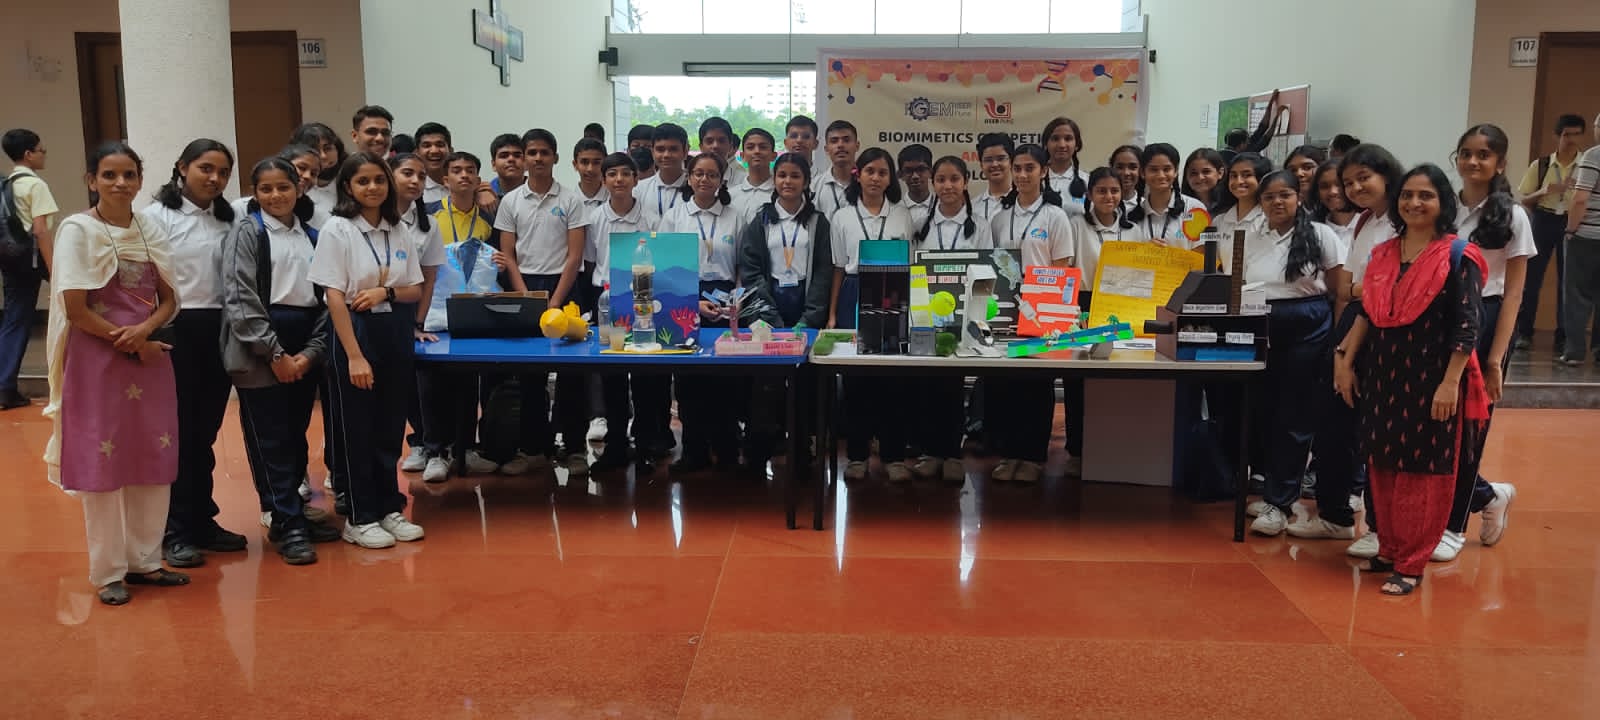 The IISER Biomimetic Model Making Competition